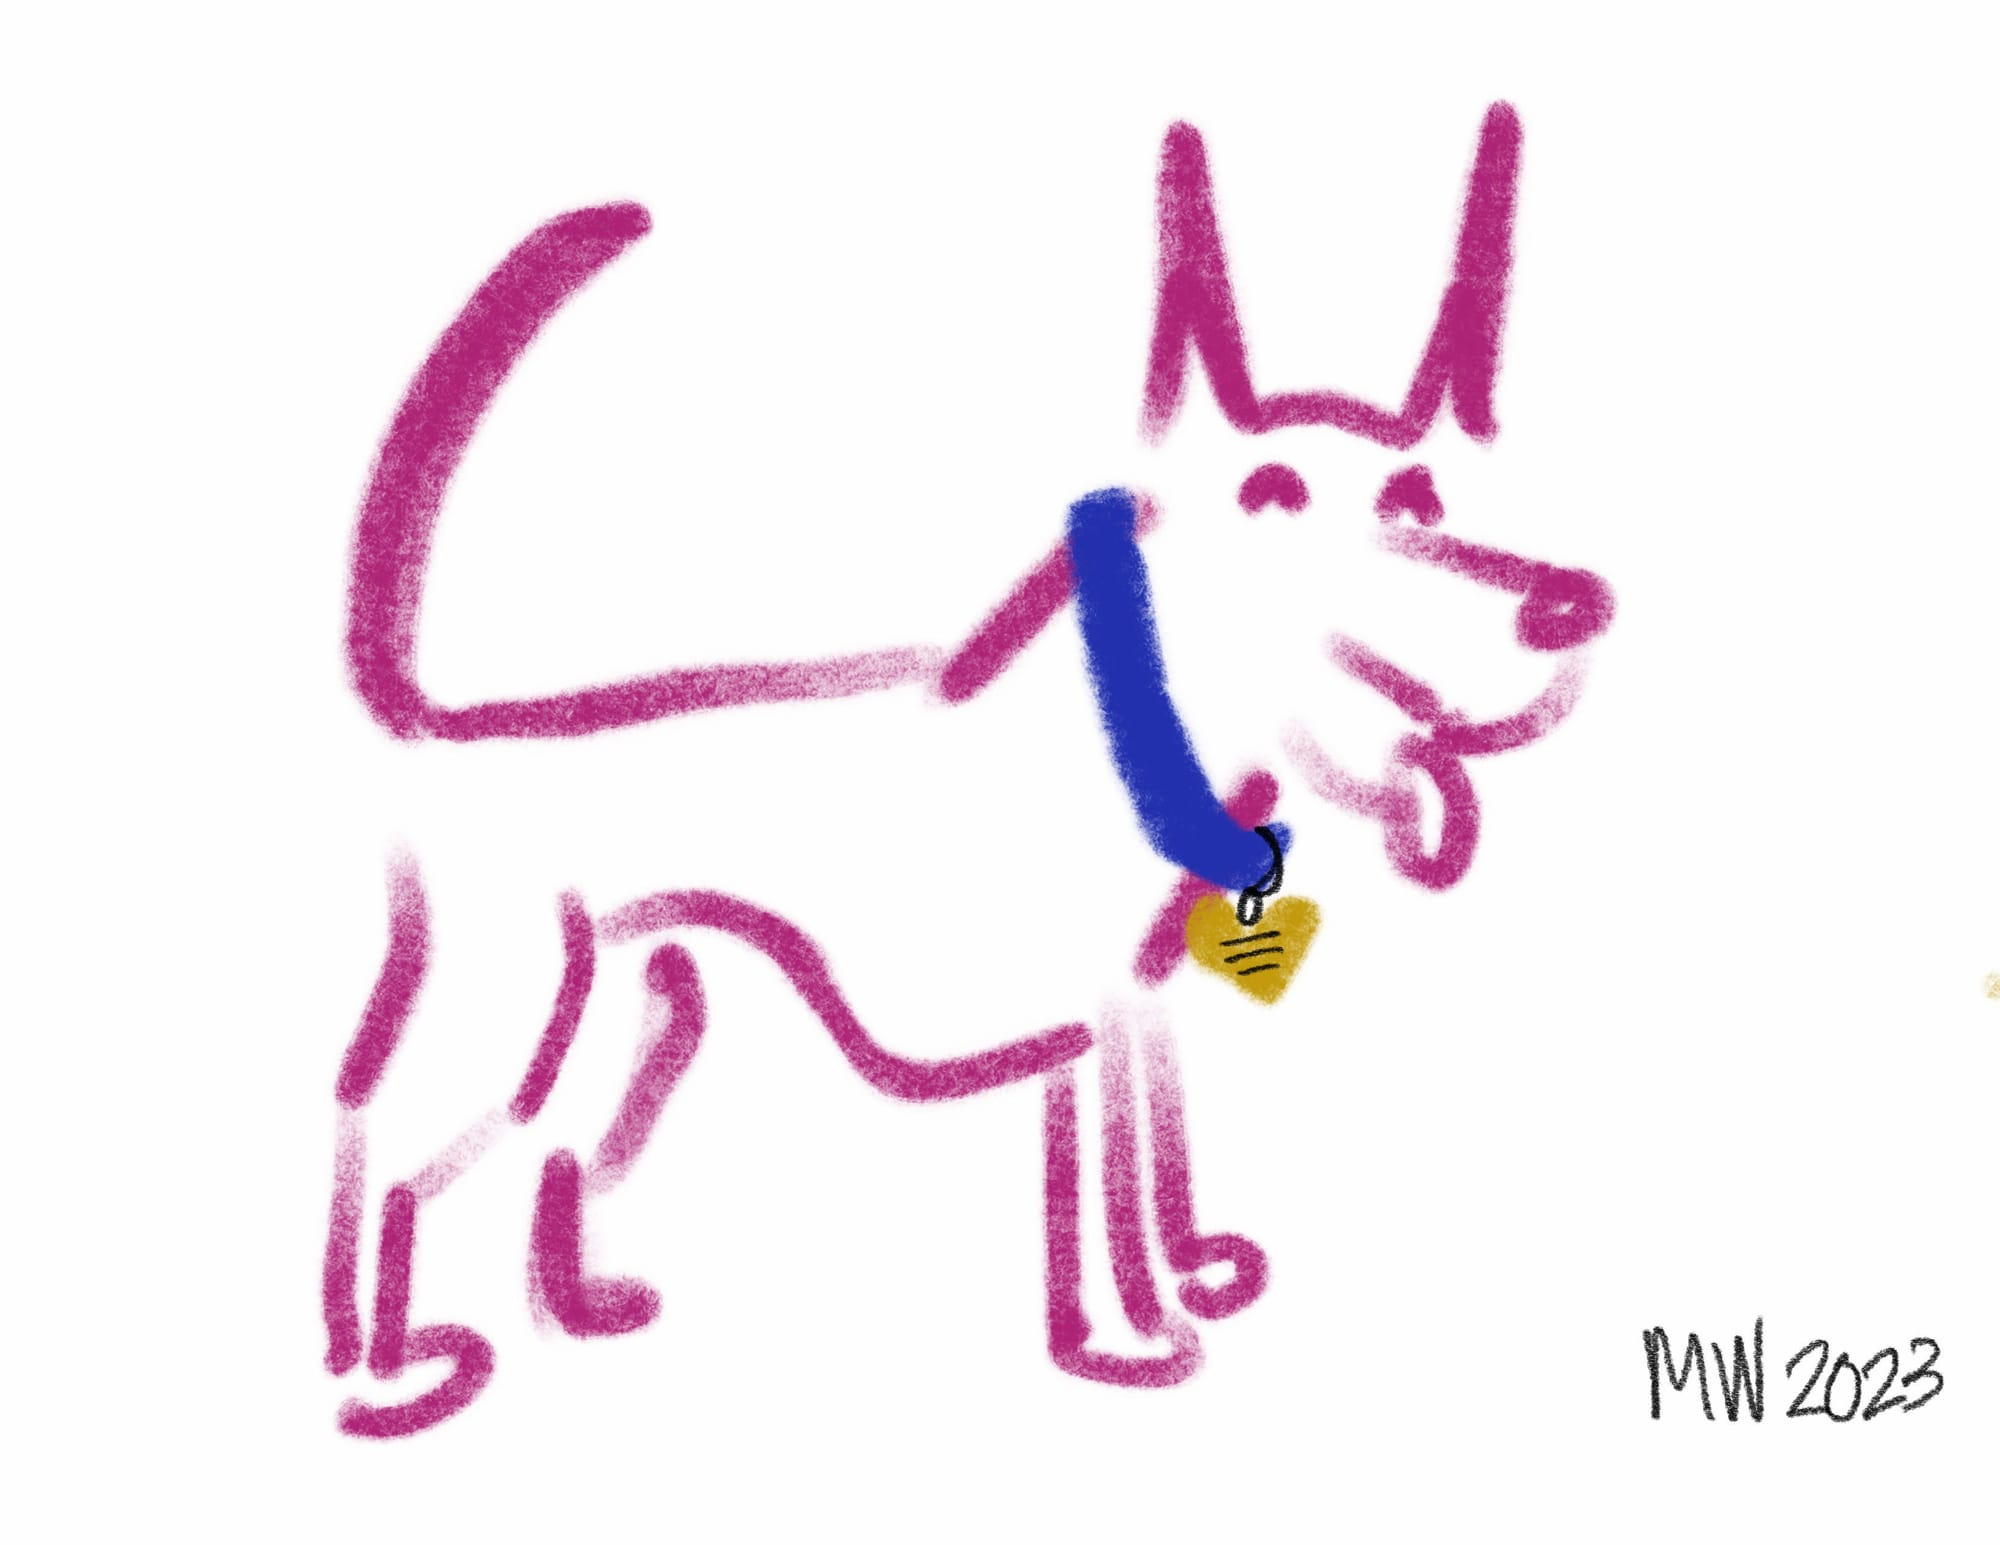 A quickly sketched drawing of a pink dog with tall pointy ears, a blue collar with a heart shaped tag, and "MW 2023" signed in the corner.